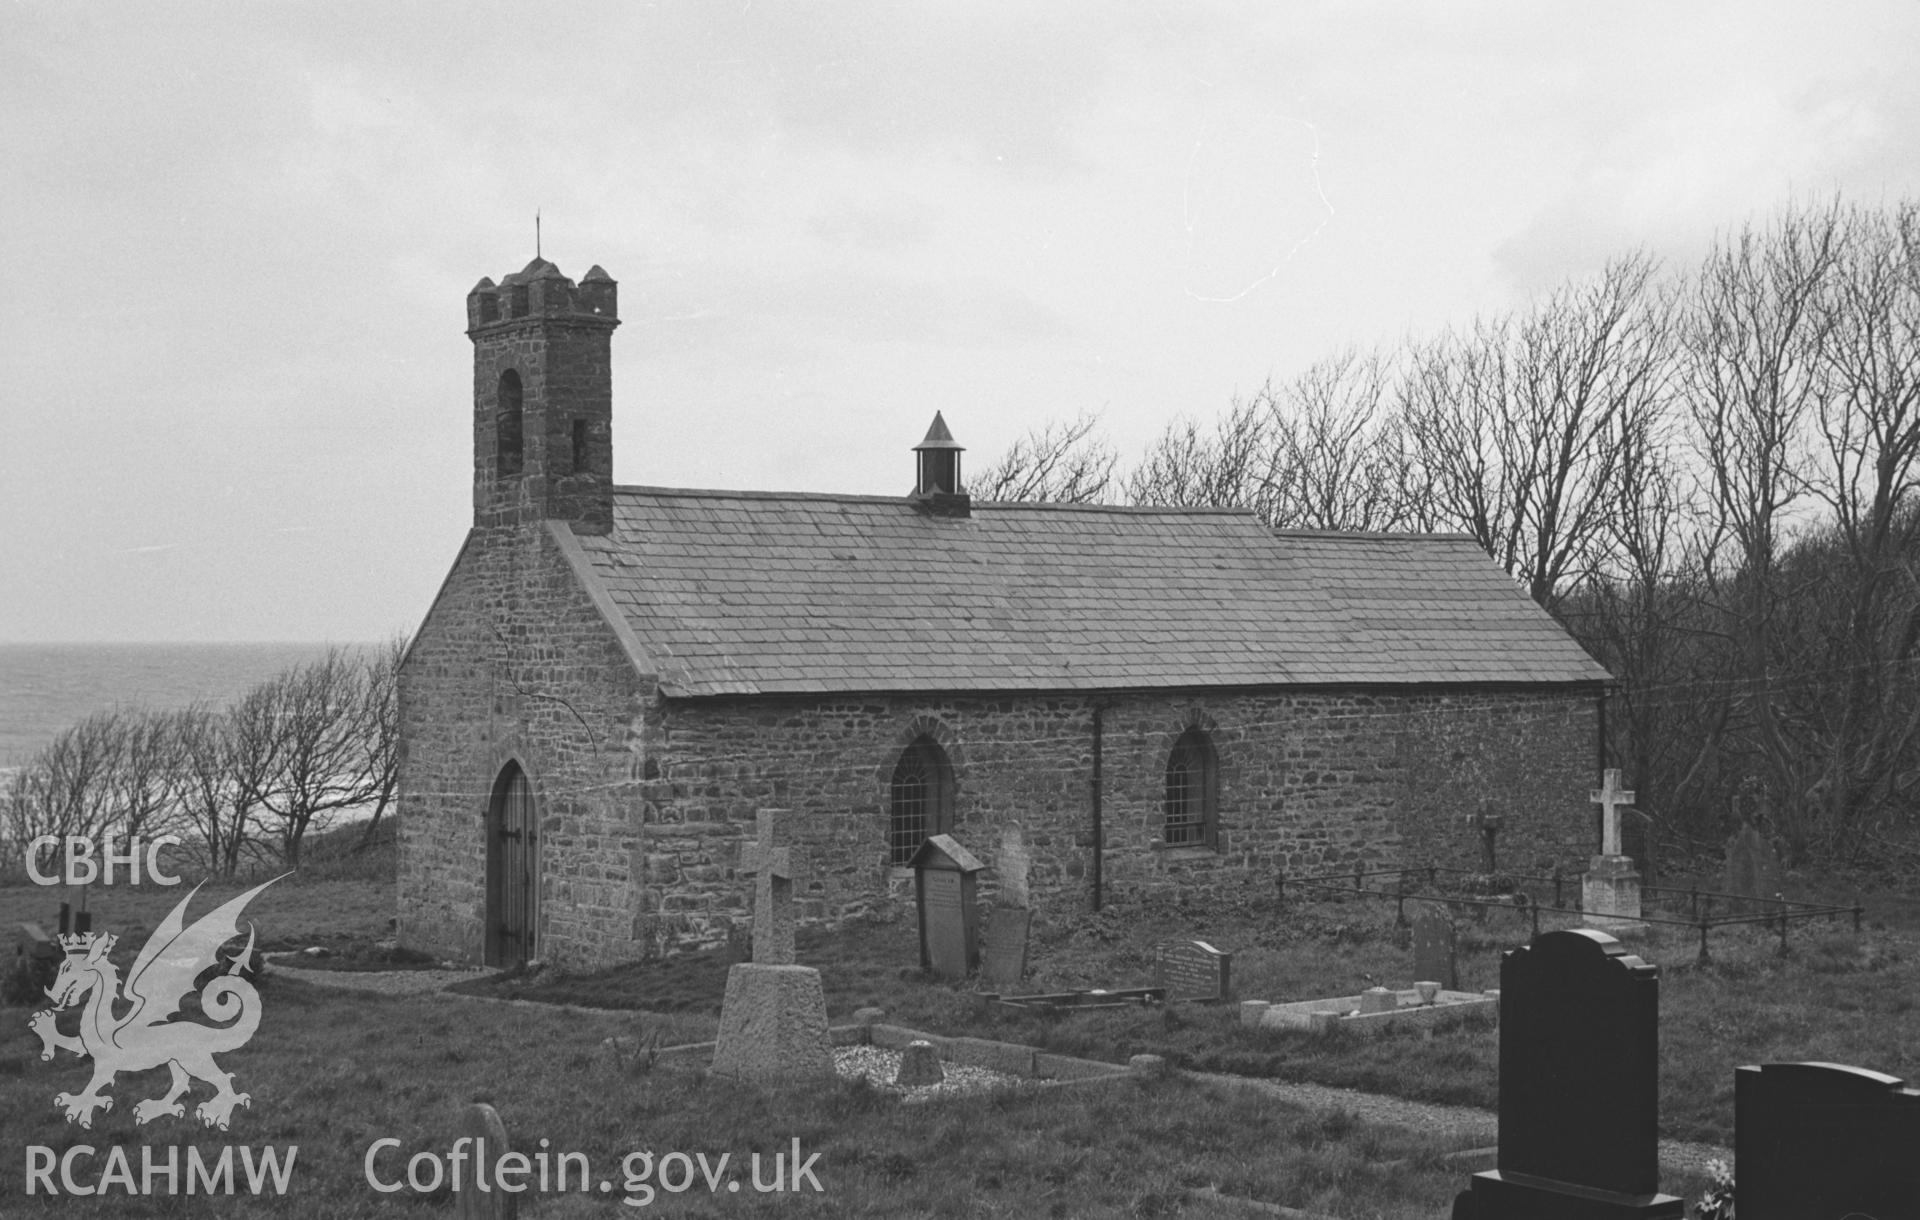 Digital copy of a black and white negative showing exterior view of St. Ina's church, Llanina, near New Quay. Photographed by Arthur O. Chater in April 1966 from Grid Reference SN 405 598, looking north east.